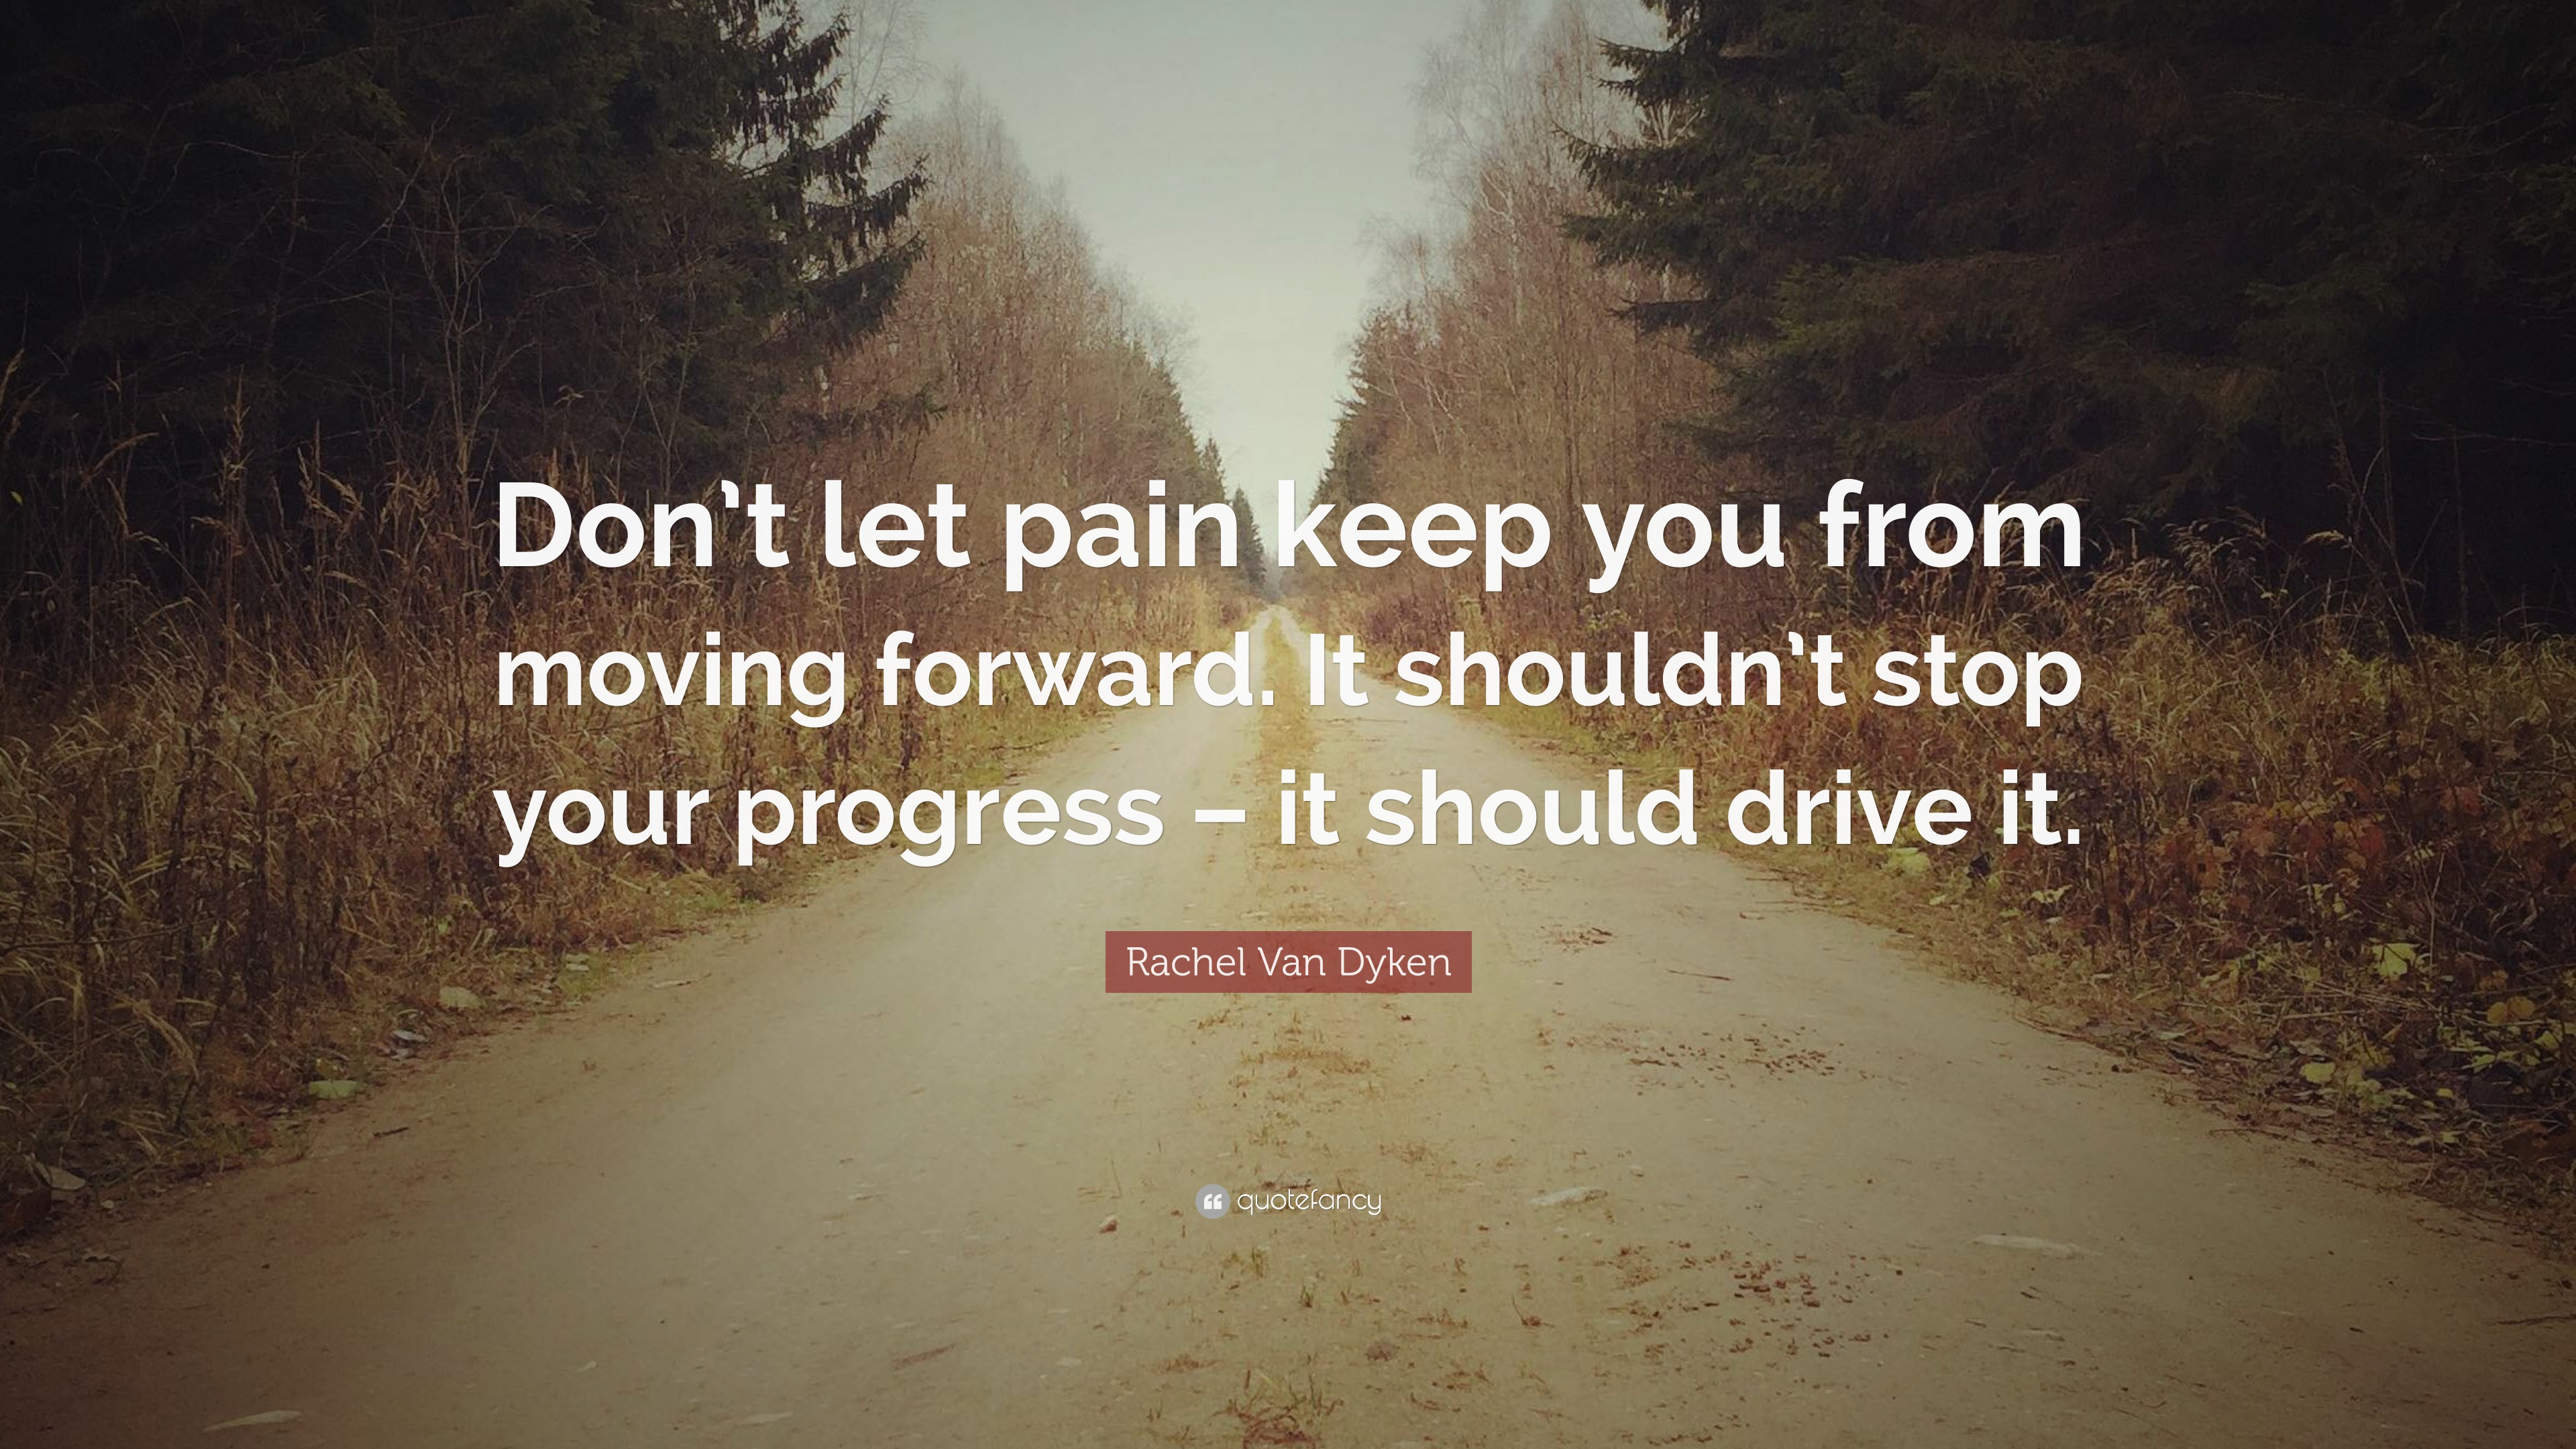 Rachel Van Dyken Quote: “Don’t let pain keep you from moving forward ...